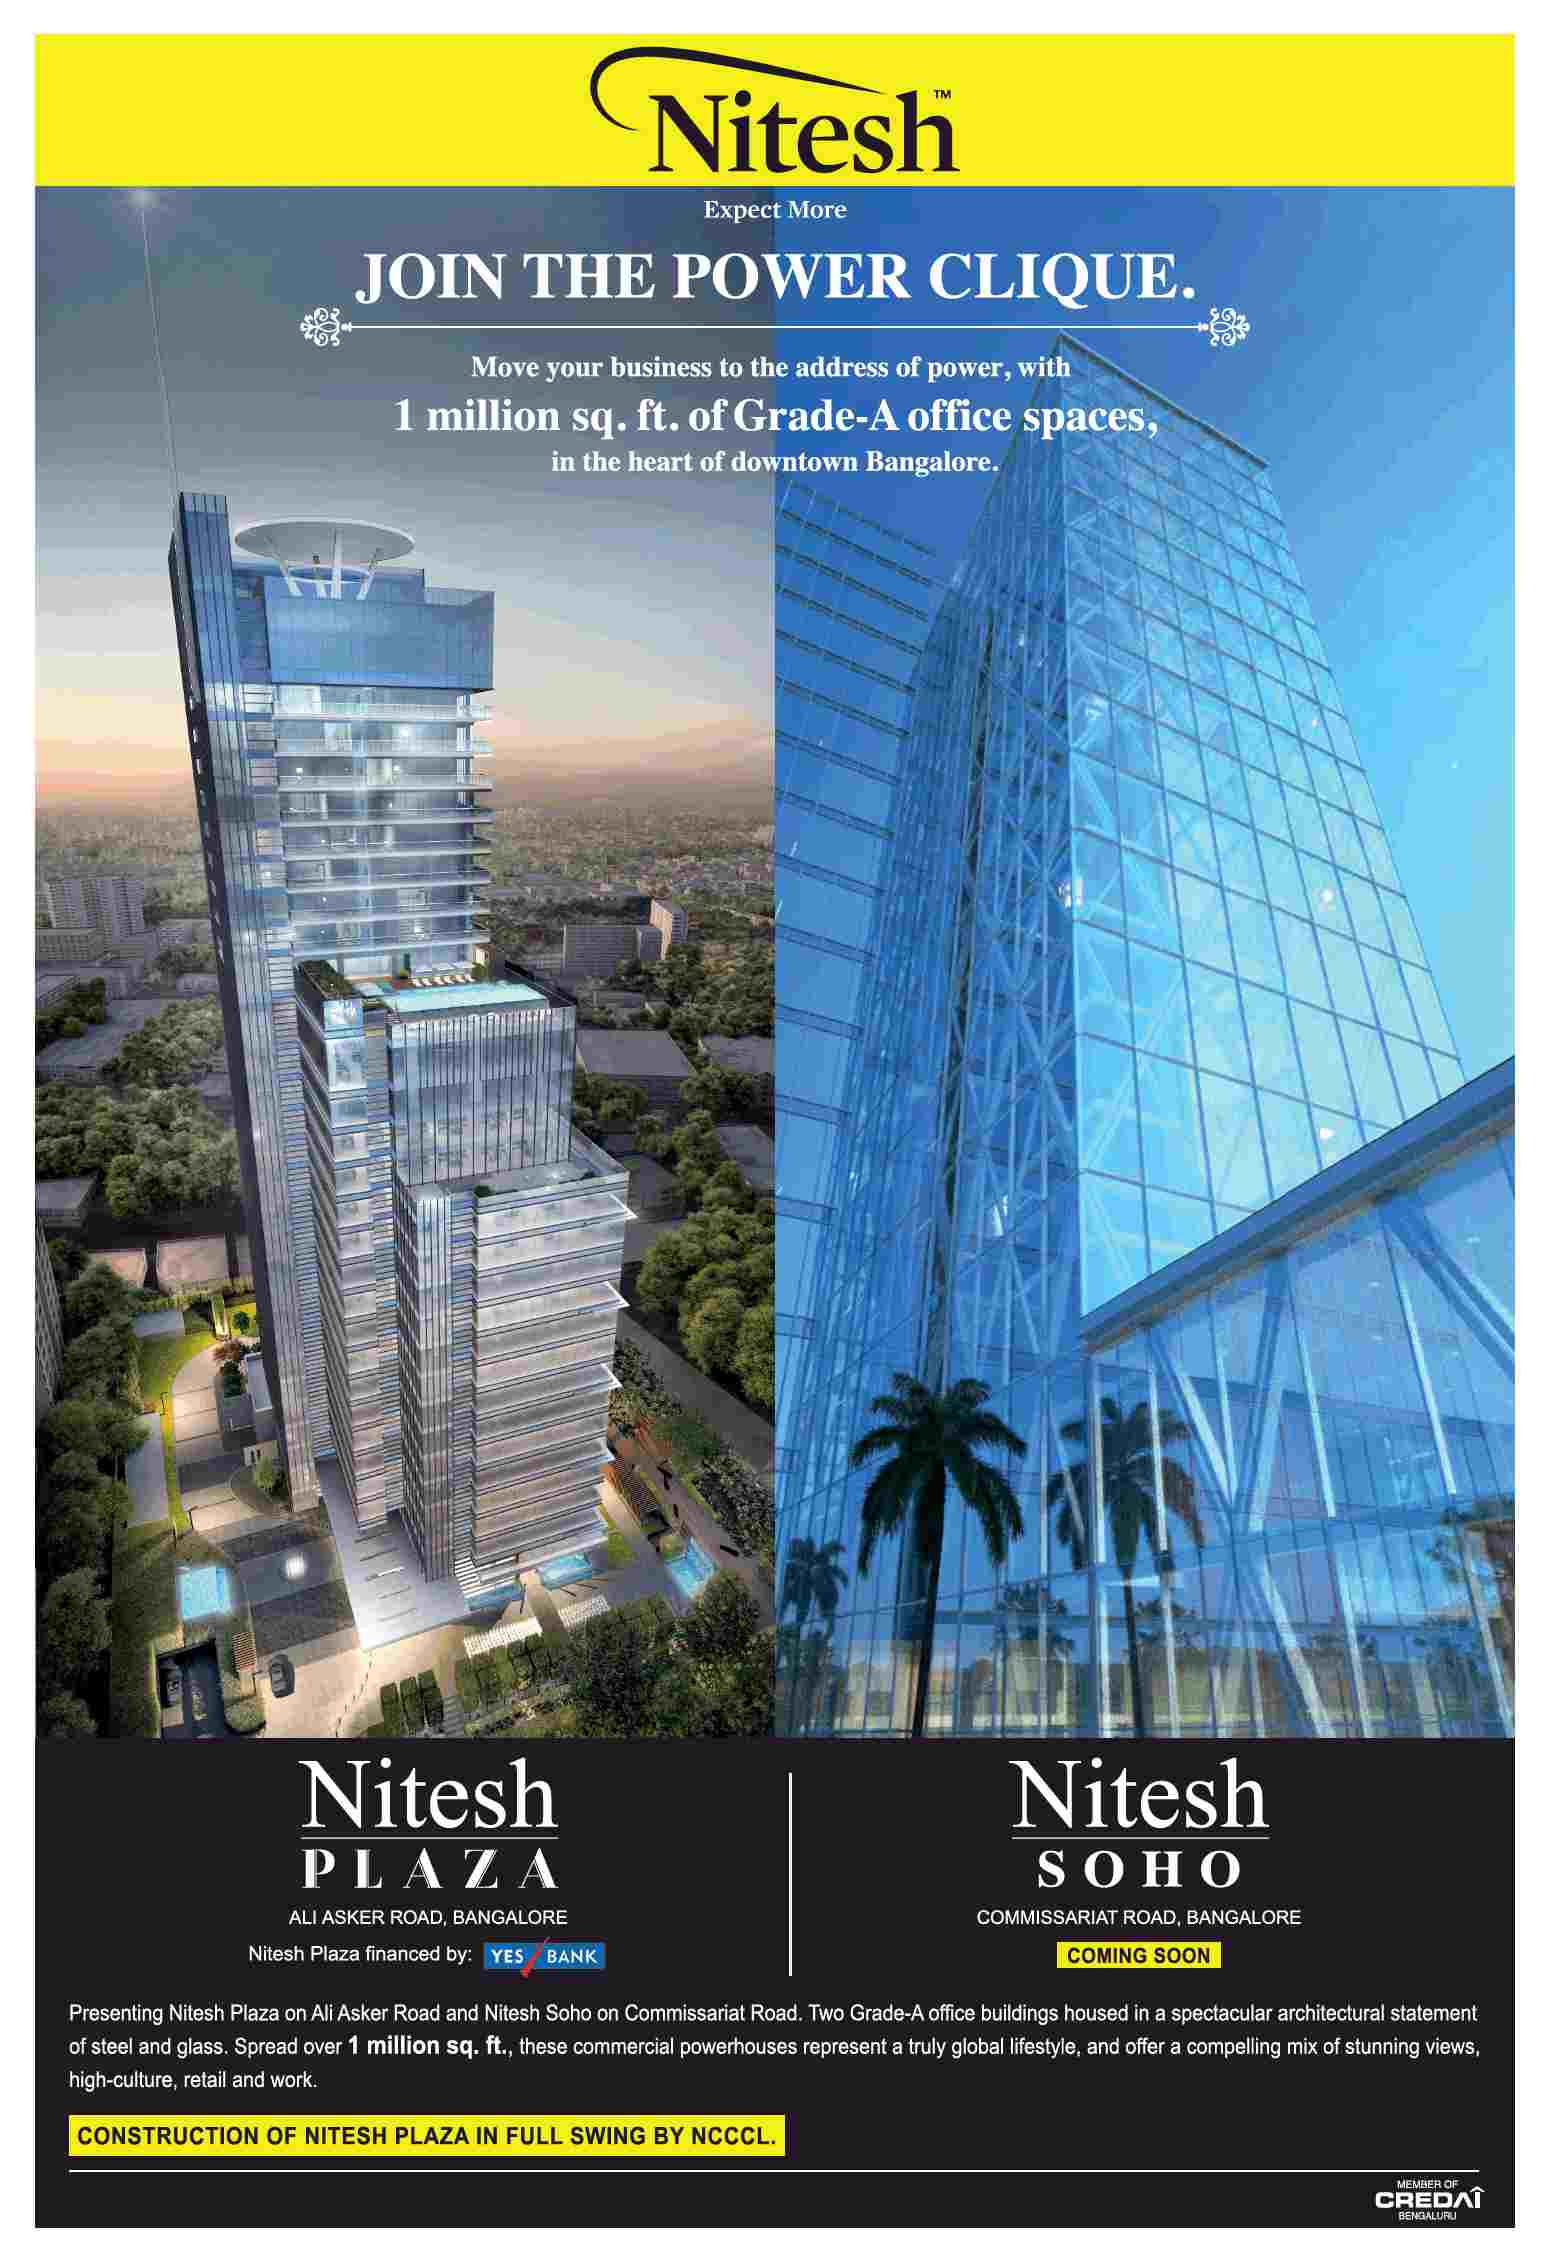 Move your business to the address of power by investing in Nitesh Projects in Bangalore Update